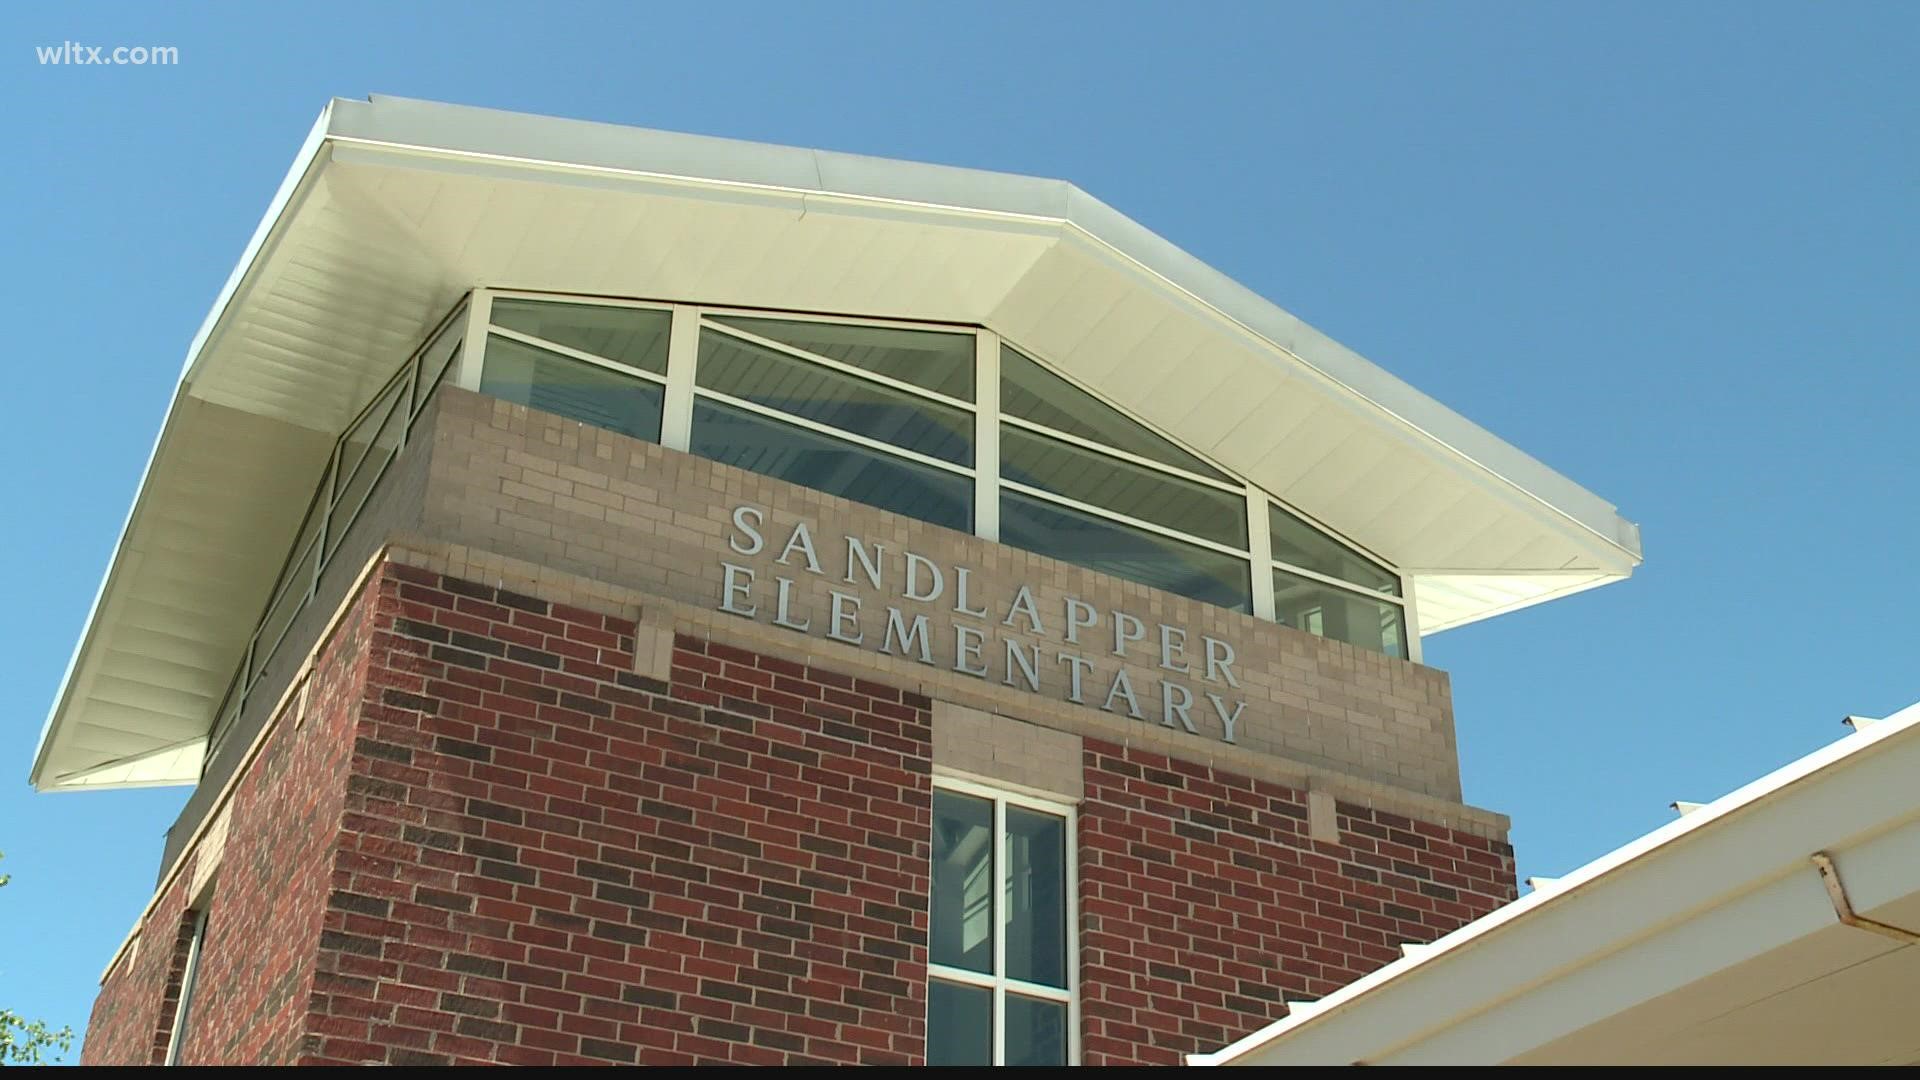 No one was hurt in the incident at Sandlapper Elementary school.